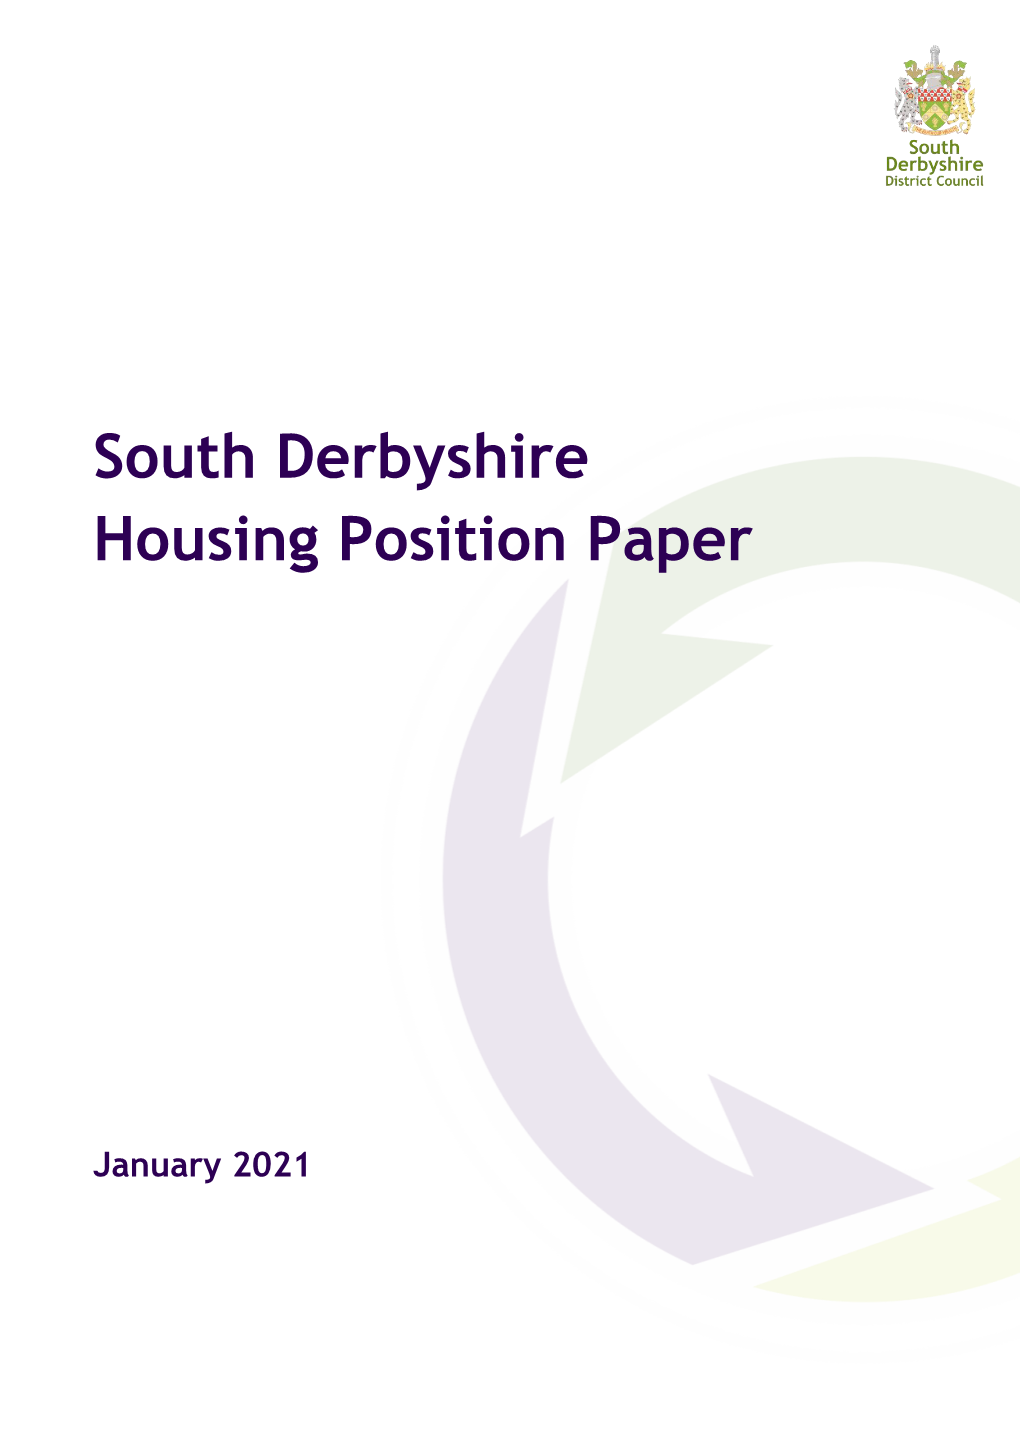 Housing Position Paper January 2021